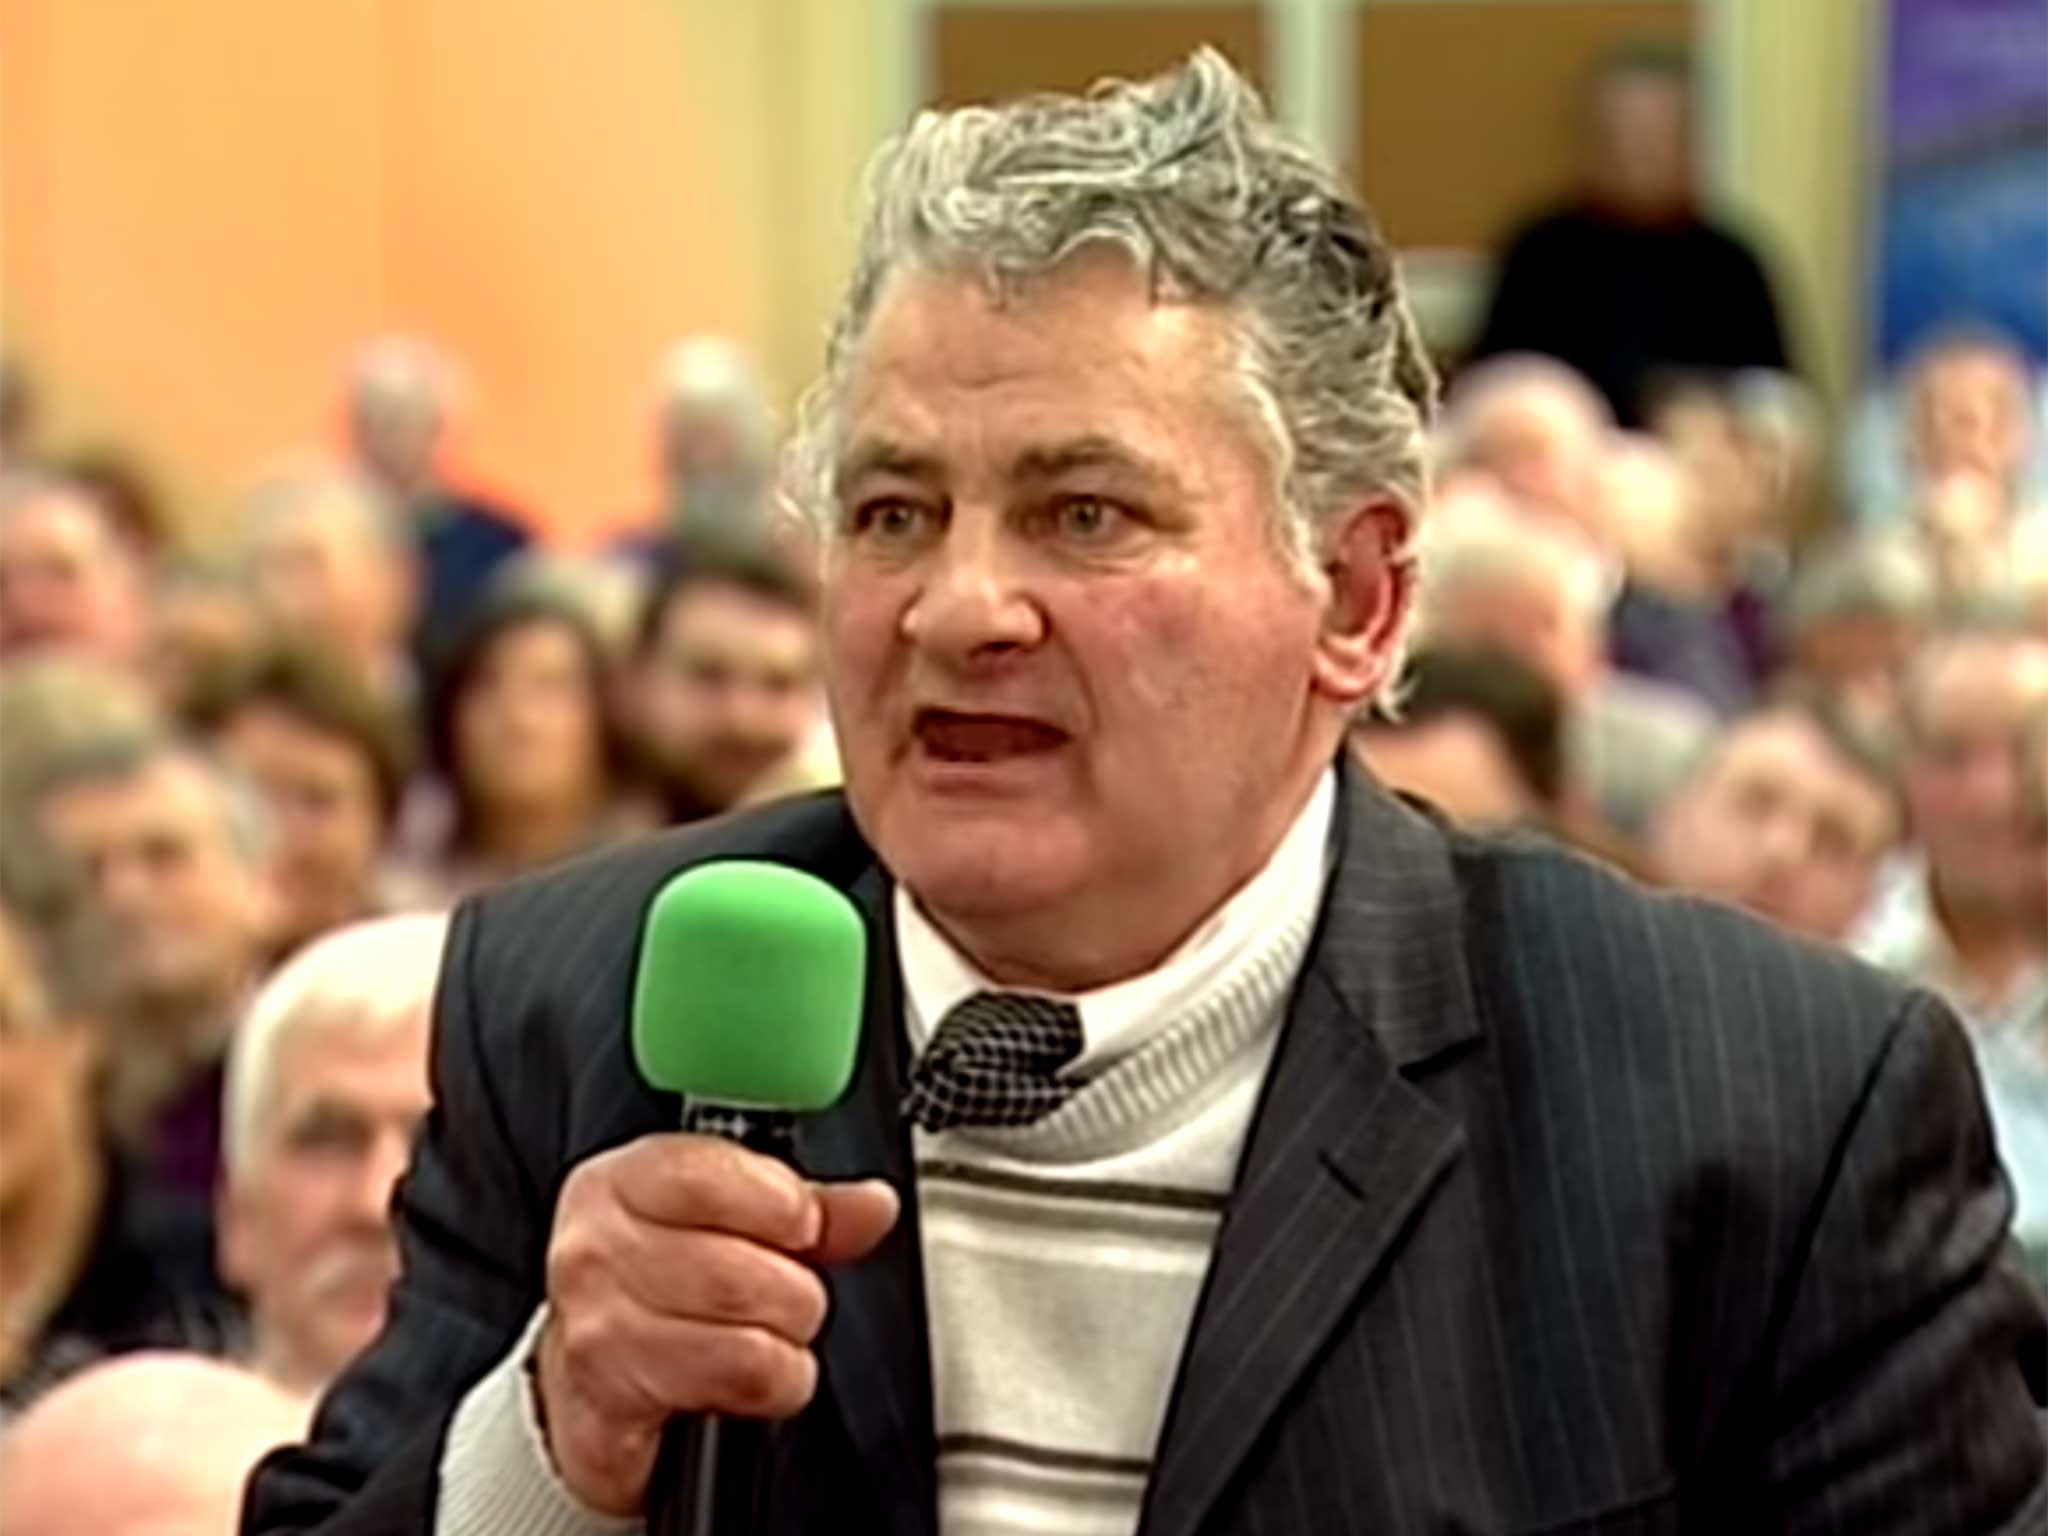 Michael O'Leary takes the microphone